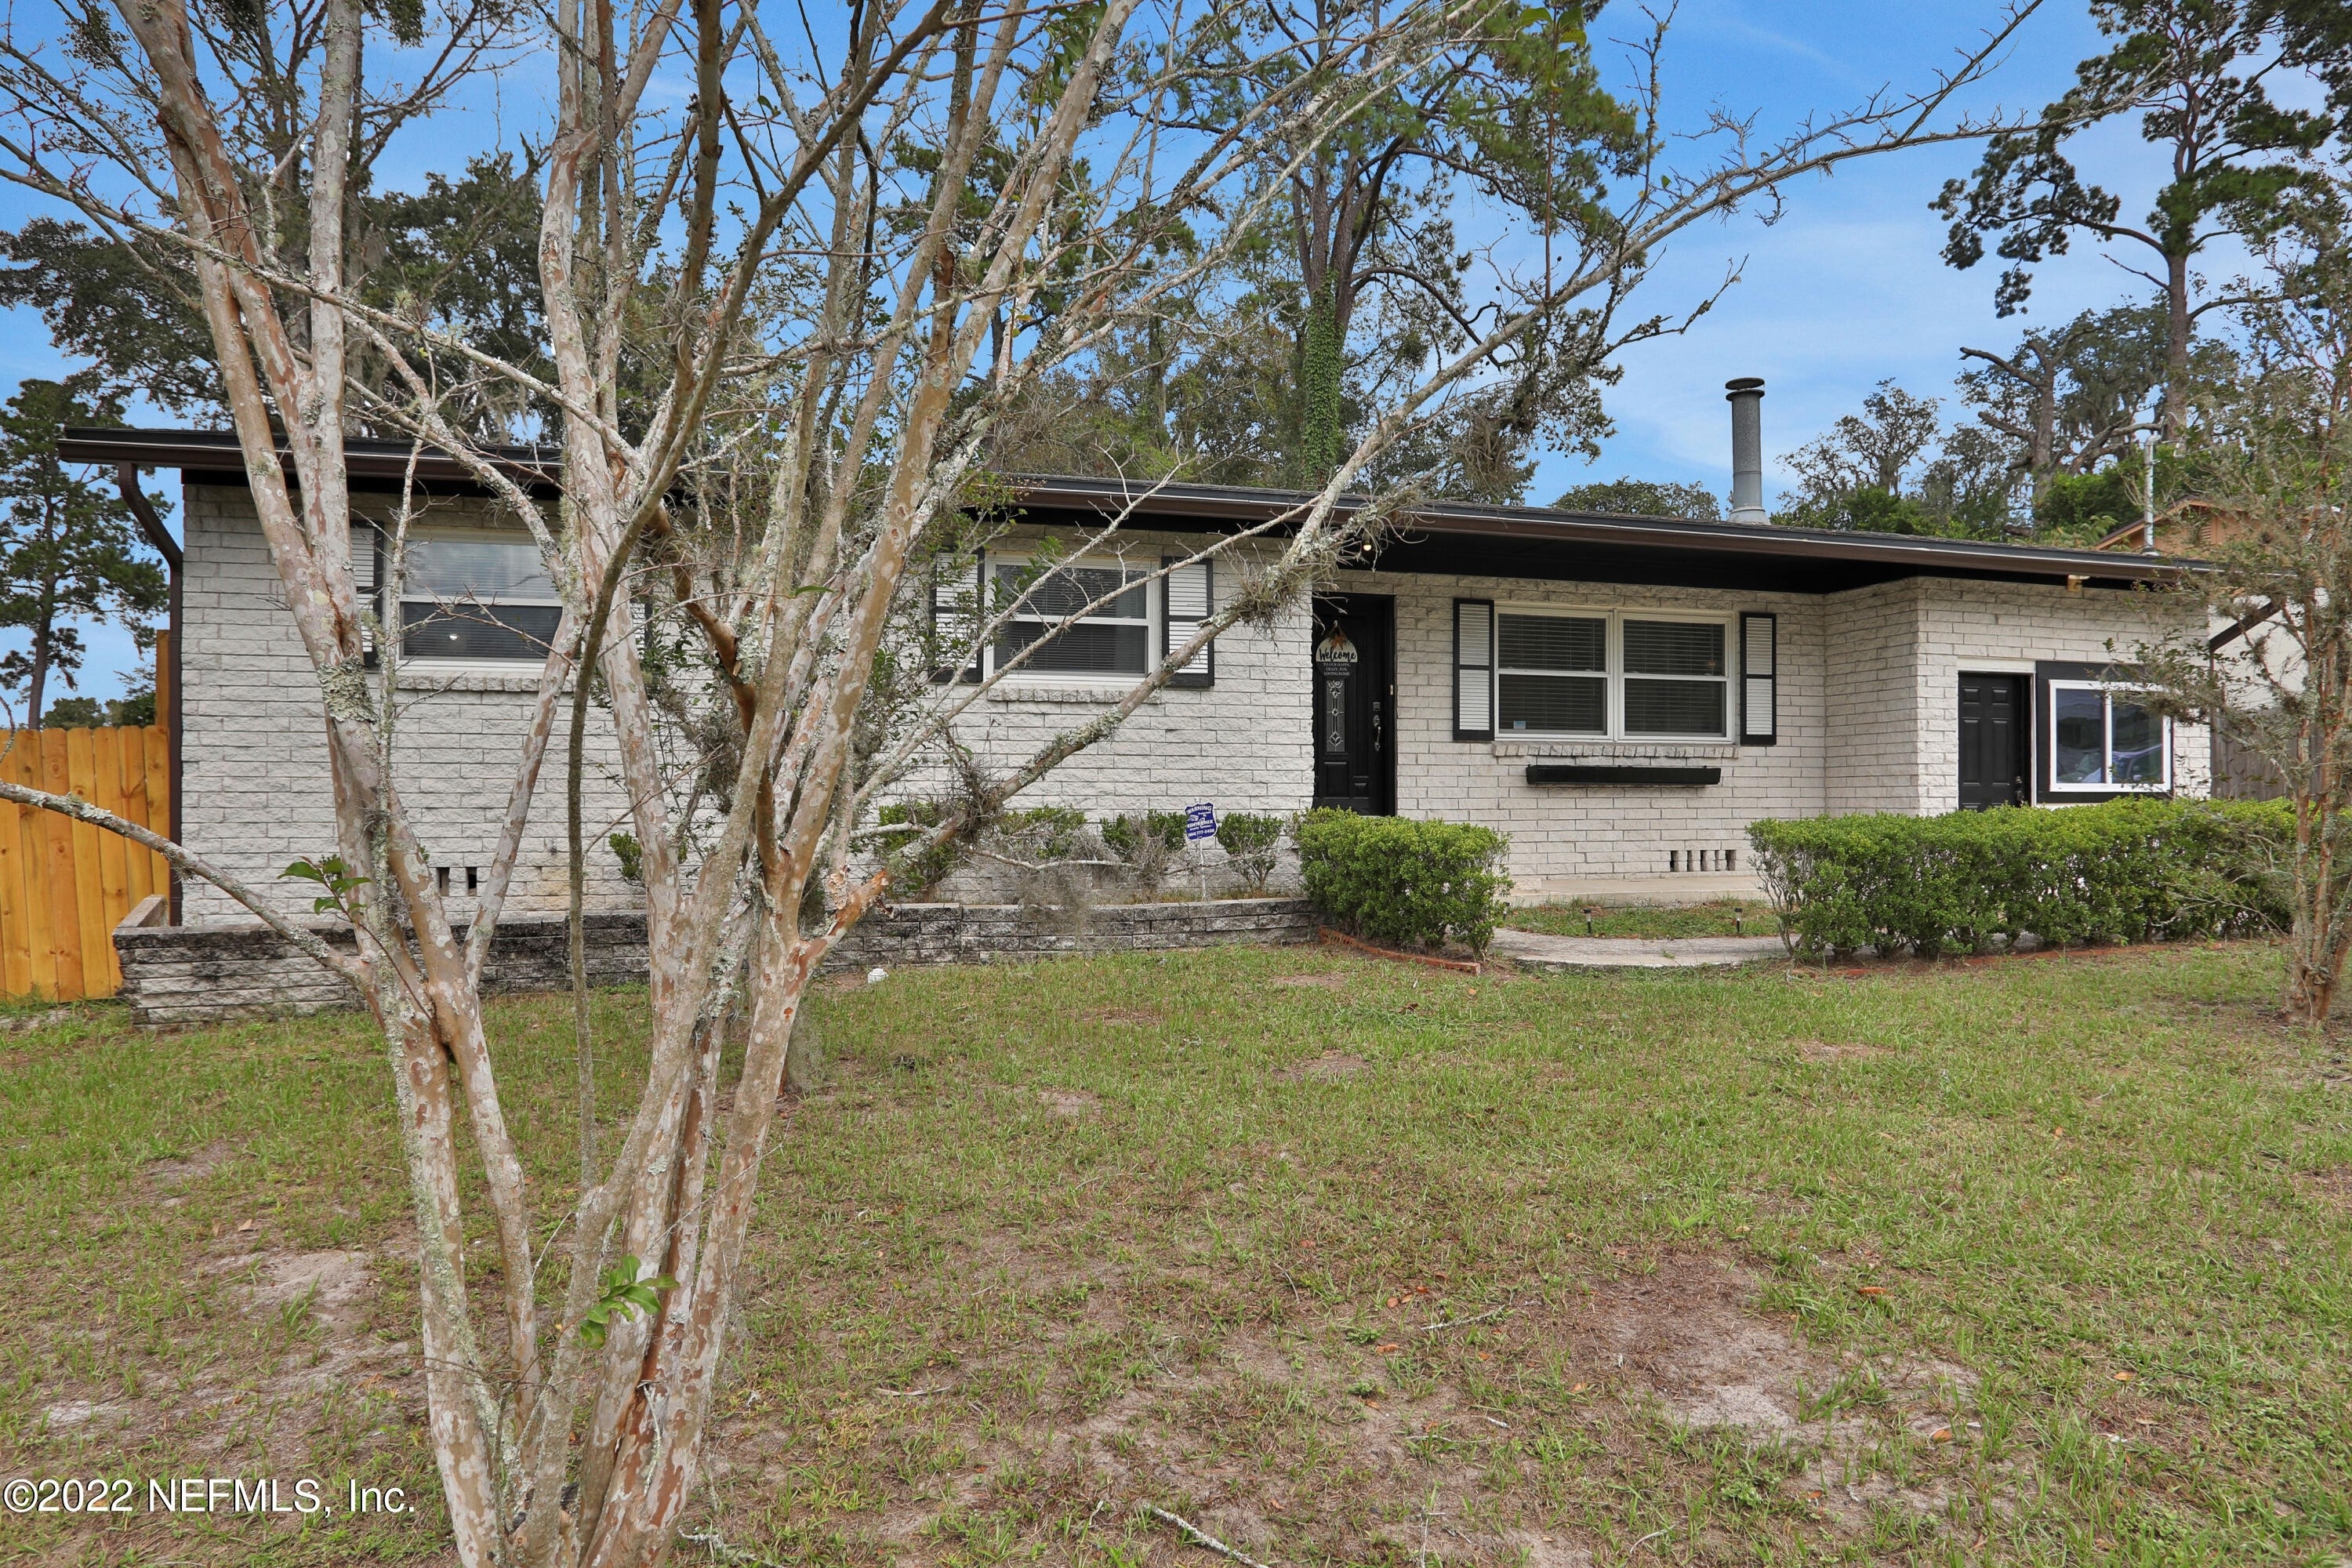 25. Single Family Homes for Sale at Bellair Meadowbrook Terrace, Orange Park, FL 32073